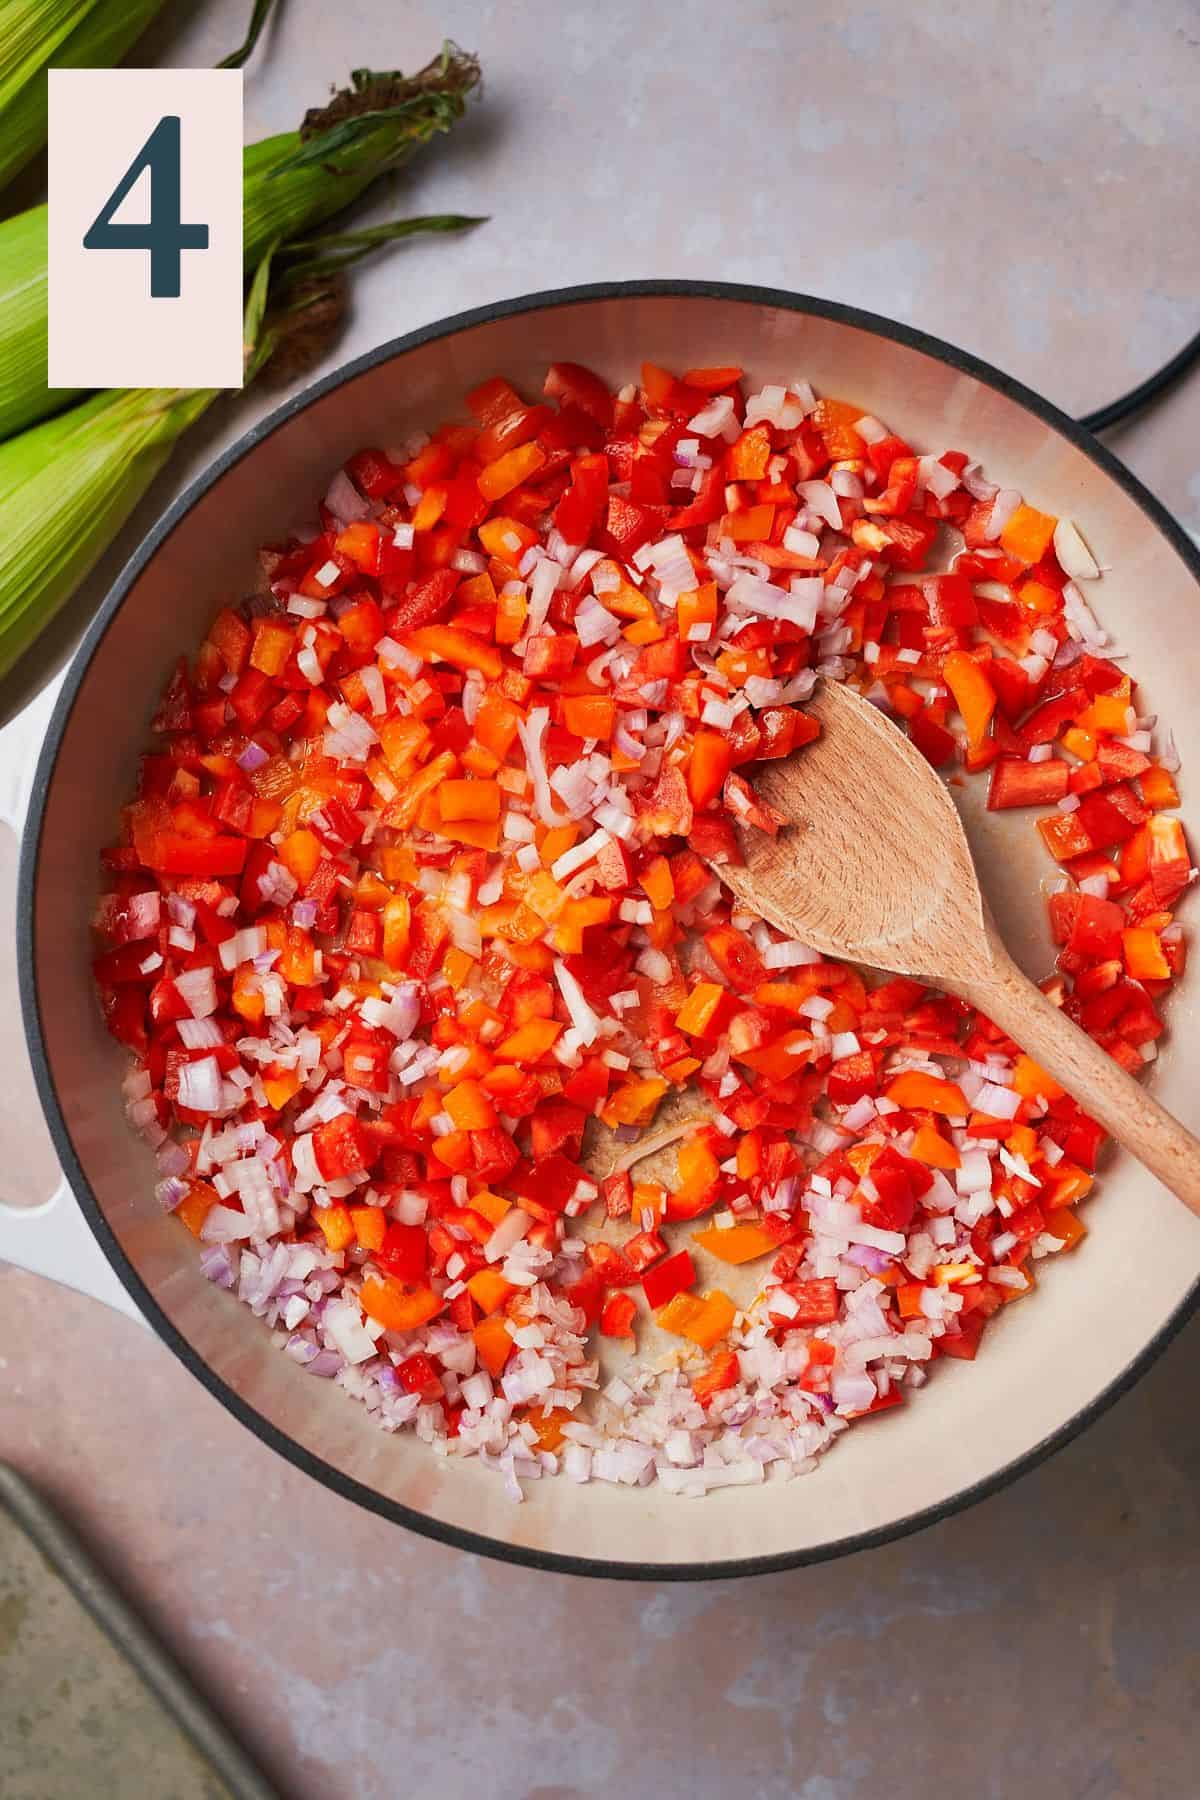 Shallots and bell peppers in a skillet.